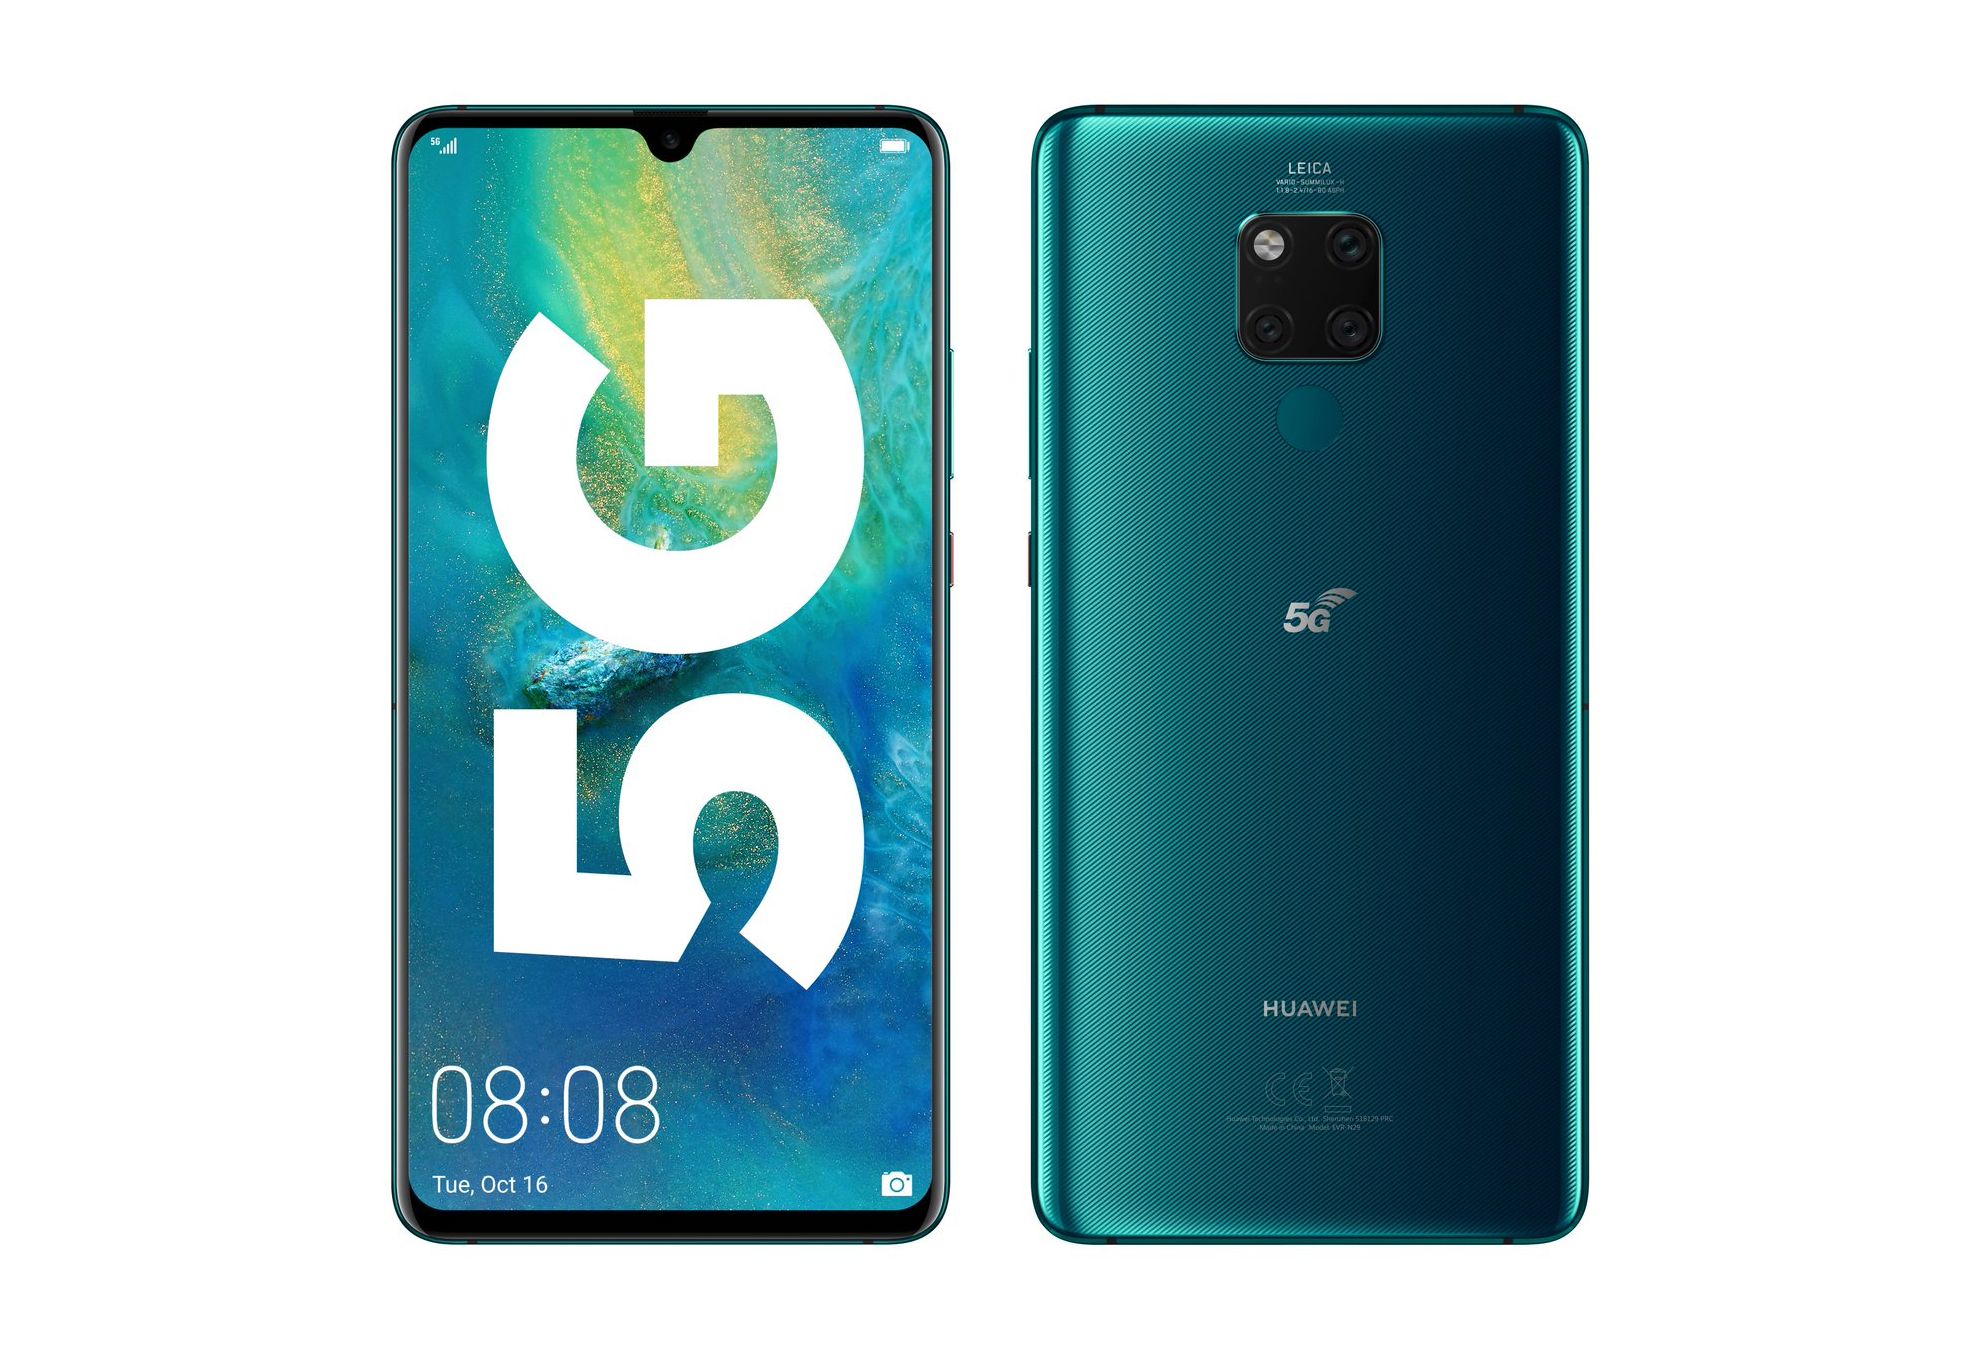 Huawei Mate 20 X 5G launched in China for 6,199 Yuan ($900 